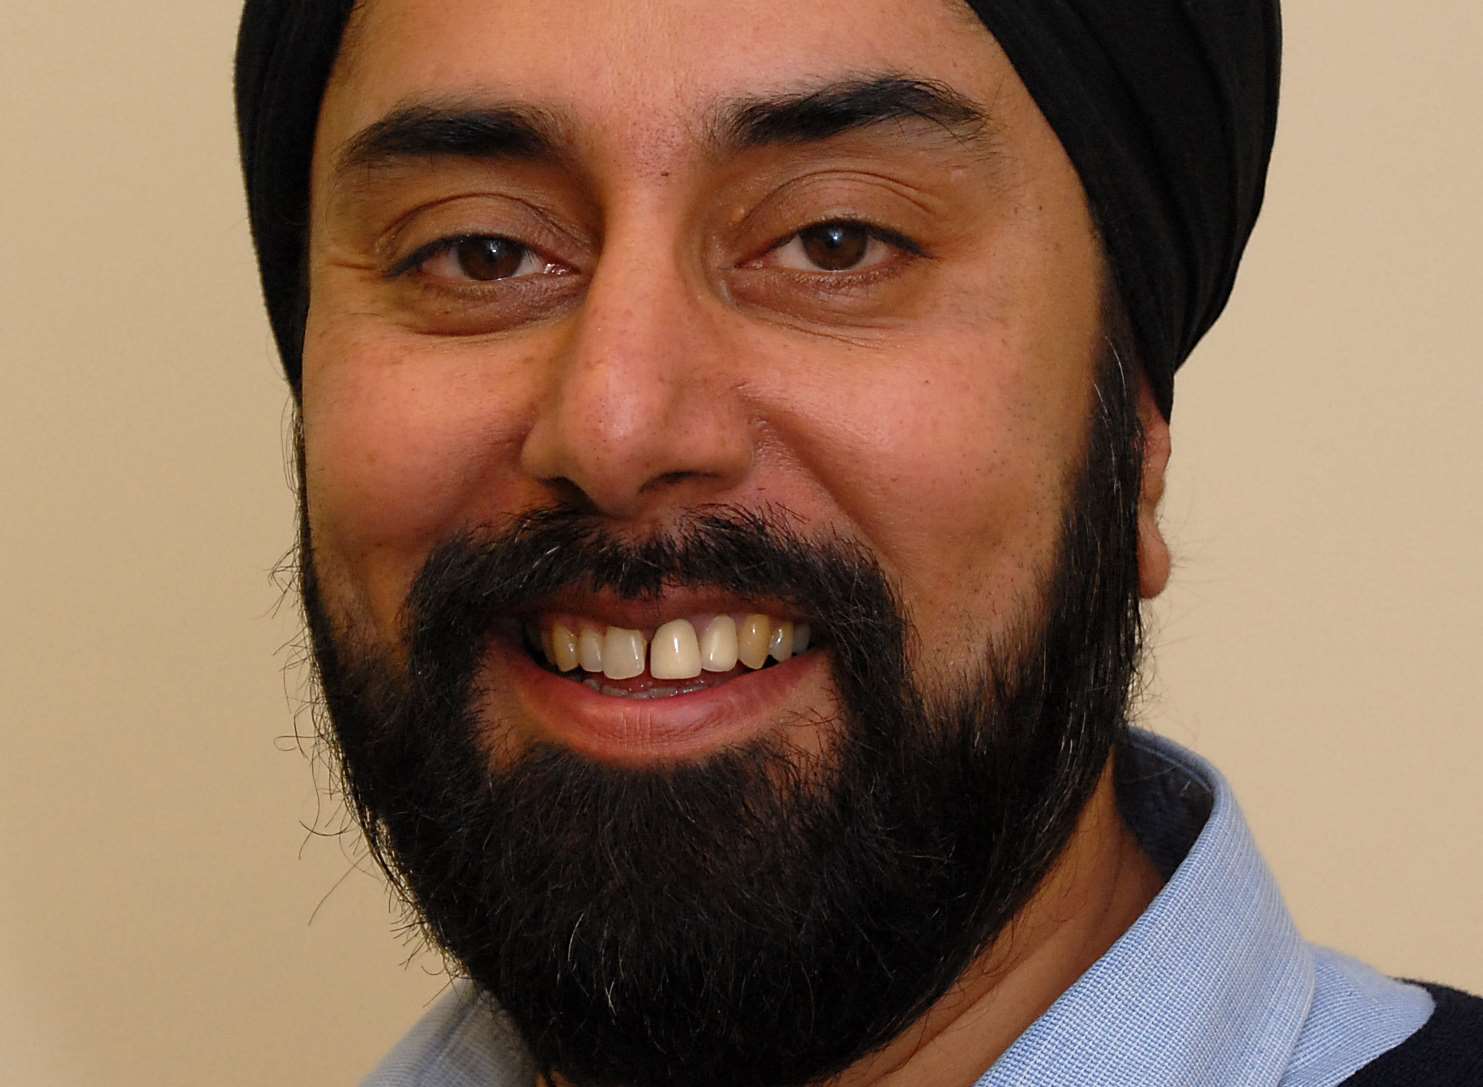 Professor Jagjit Chadha is director of the National Institute of Economic and Social Research and works at the University of Kent